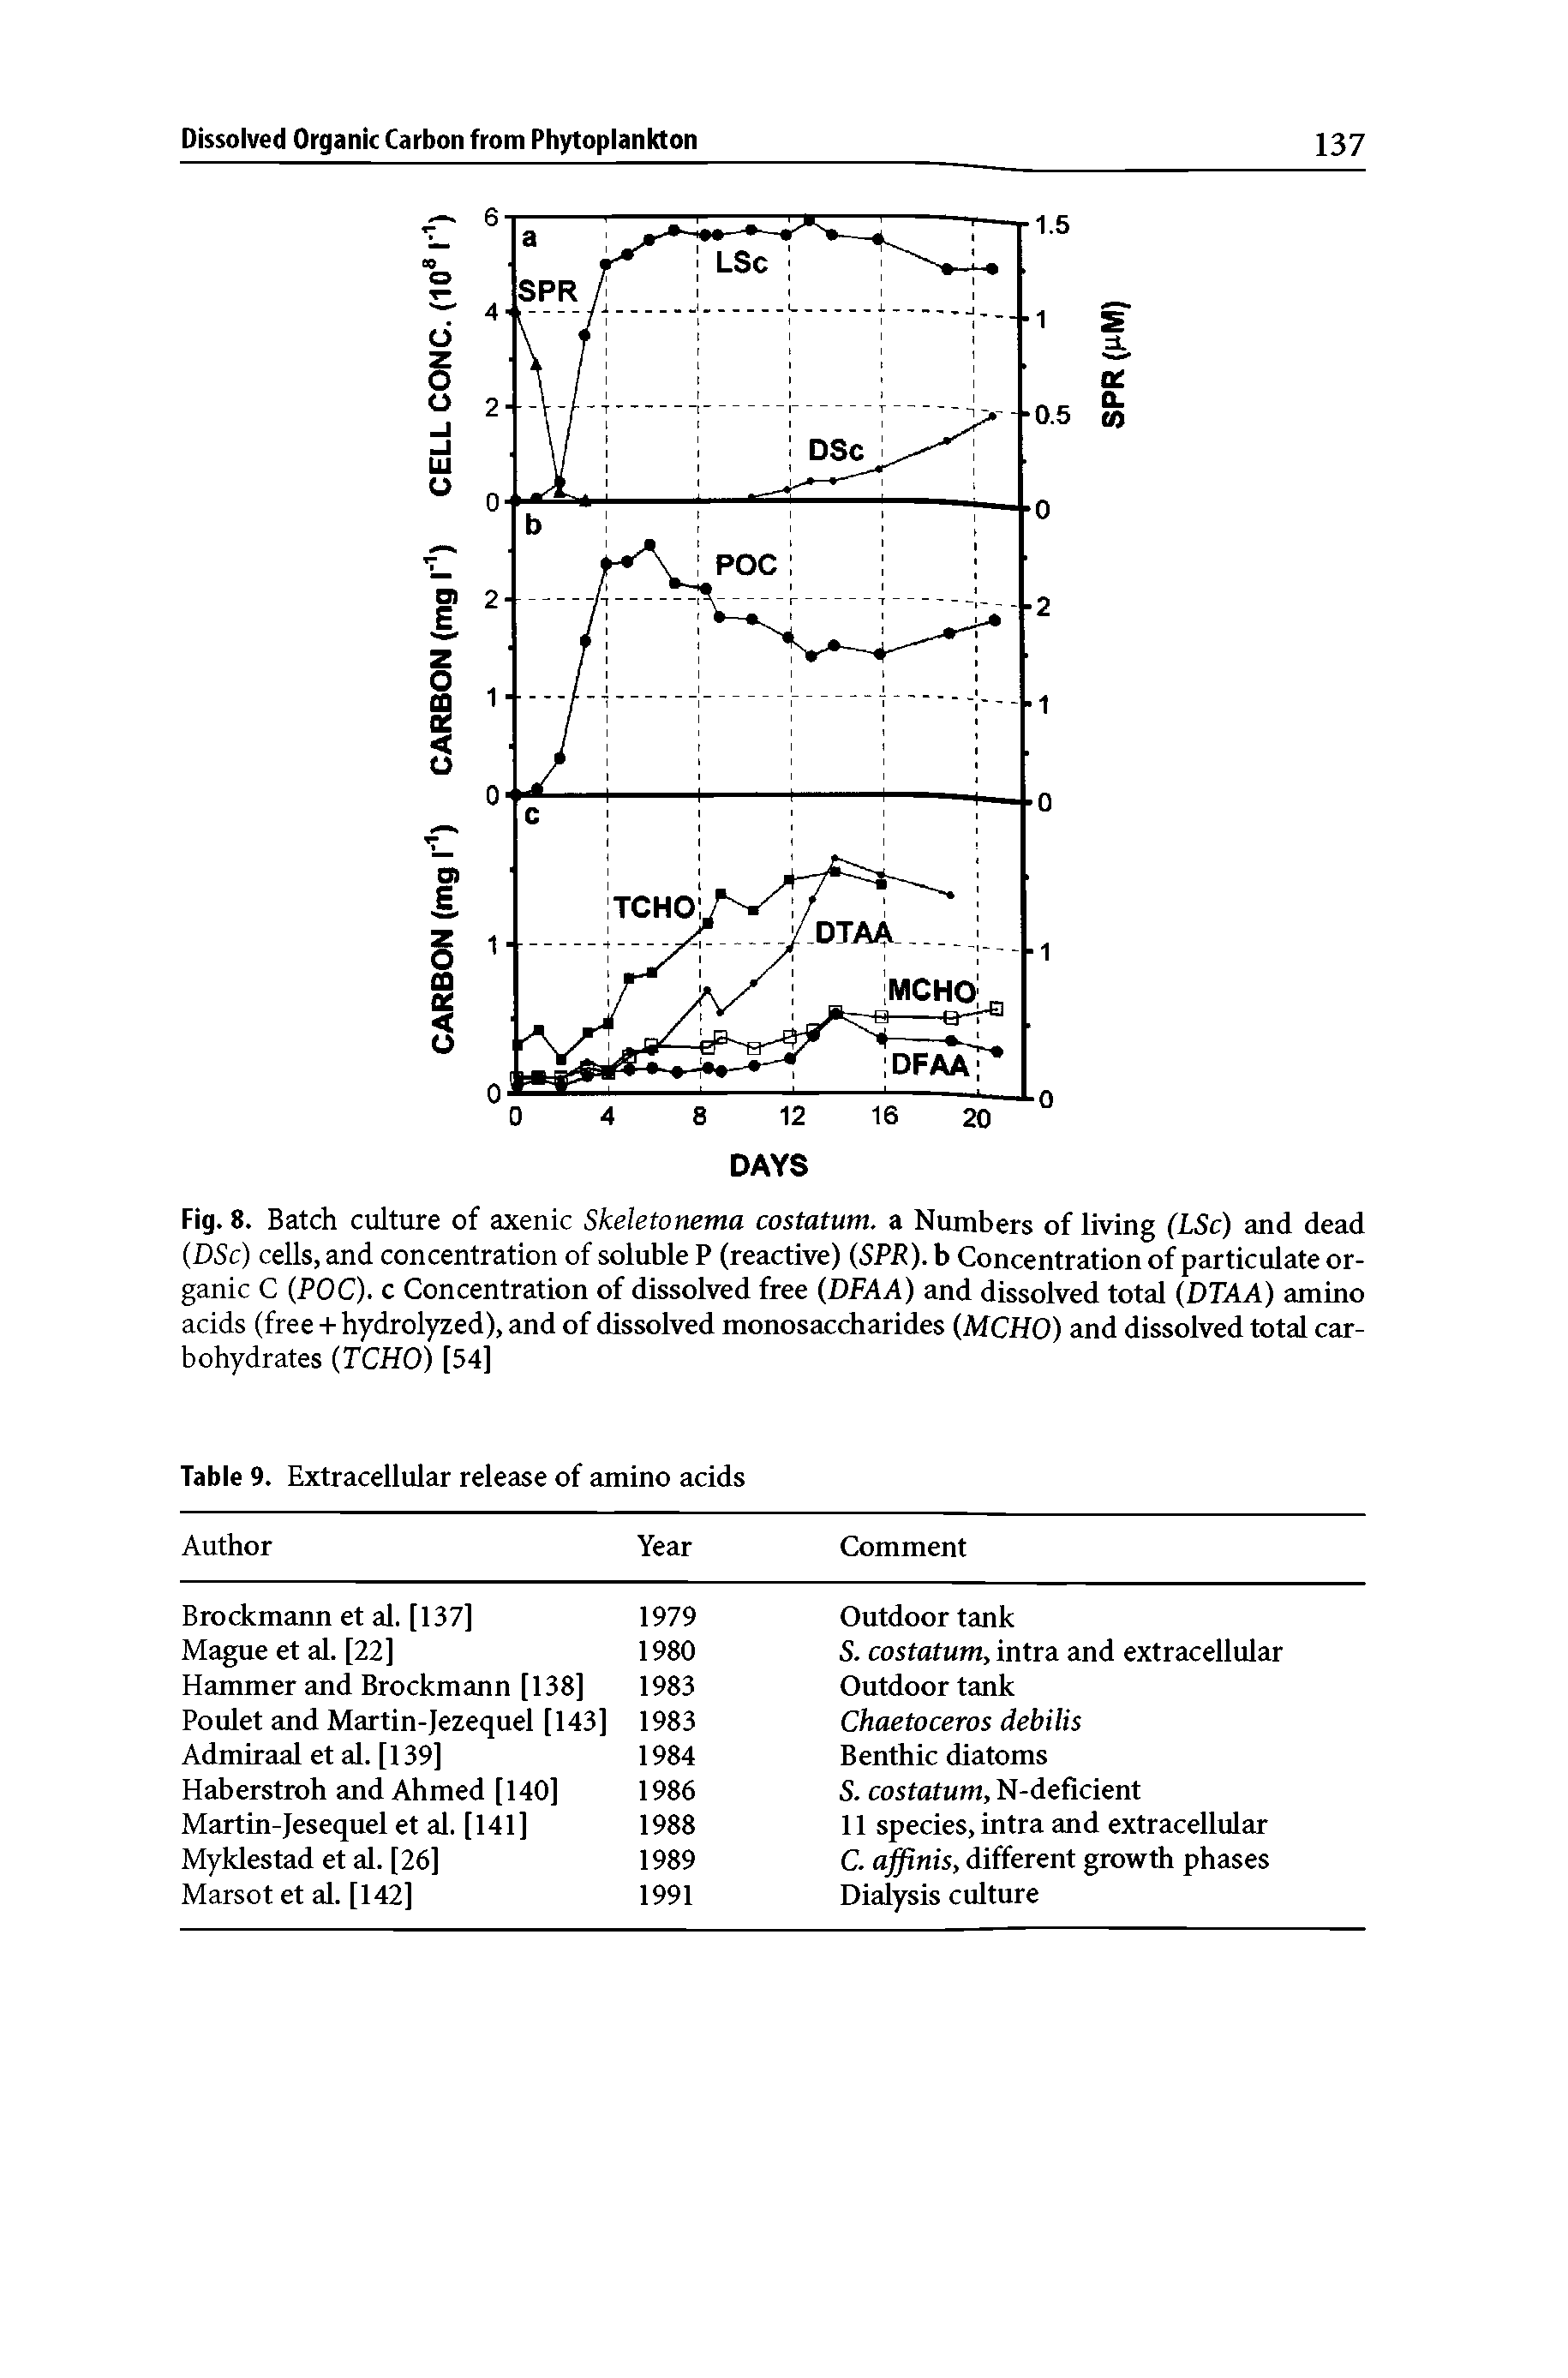 Fig. 8. Batch culture of axenic Skeletonema costatum. a Numbers of living (LSc) and dead (DSc) cells, and concentration of soluble P (reactive) (SPR). b Concentration of particulate organic C (POC). c Concentration of dissolved free (DFAA) and dissolved total (DTAA) amino acids (free -I- hydrolyzed), and of dissolved monosaccharides (MCHO) and dissolved total carbohydrates (TCHO) [54]...